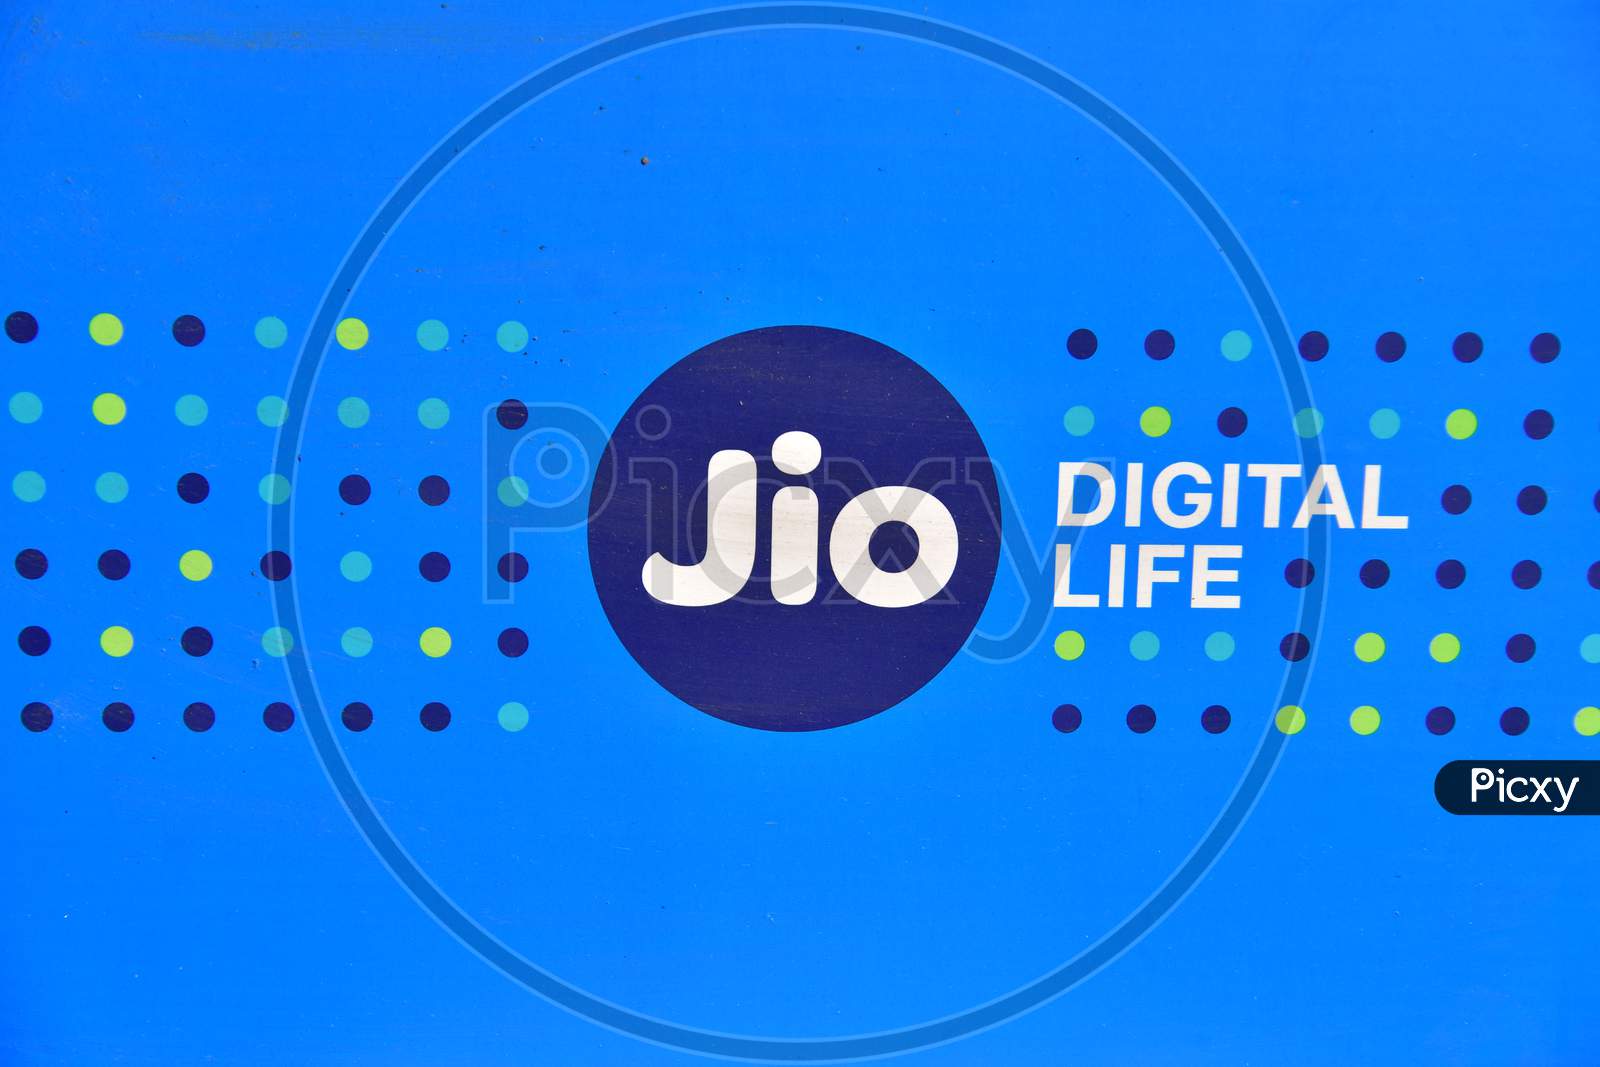 The logo of Jio Digital Life  is pictured in Assam on Dec 23,2020